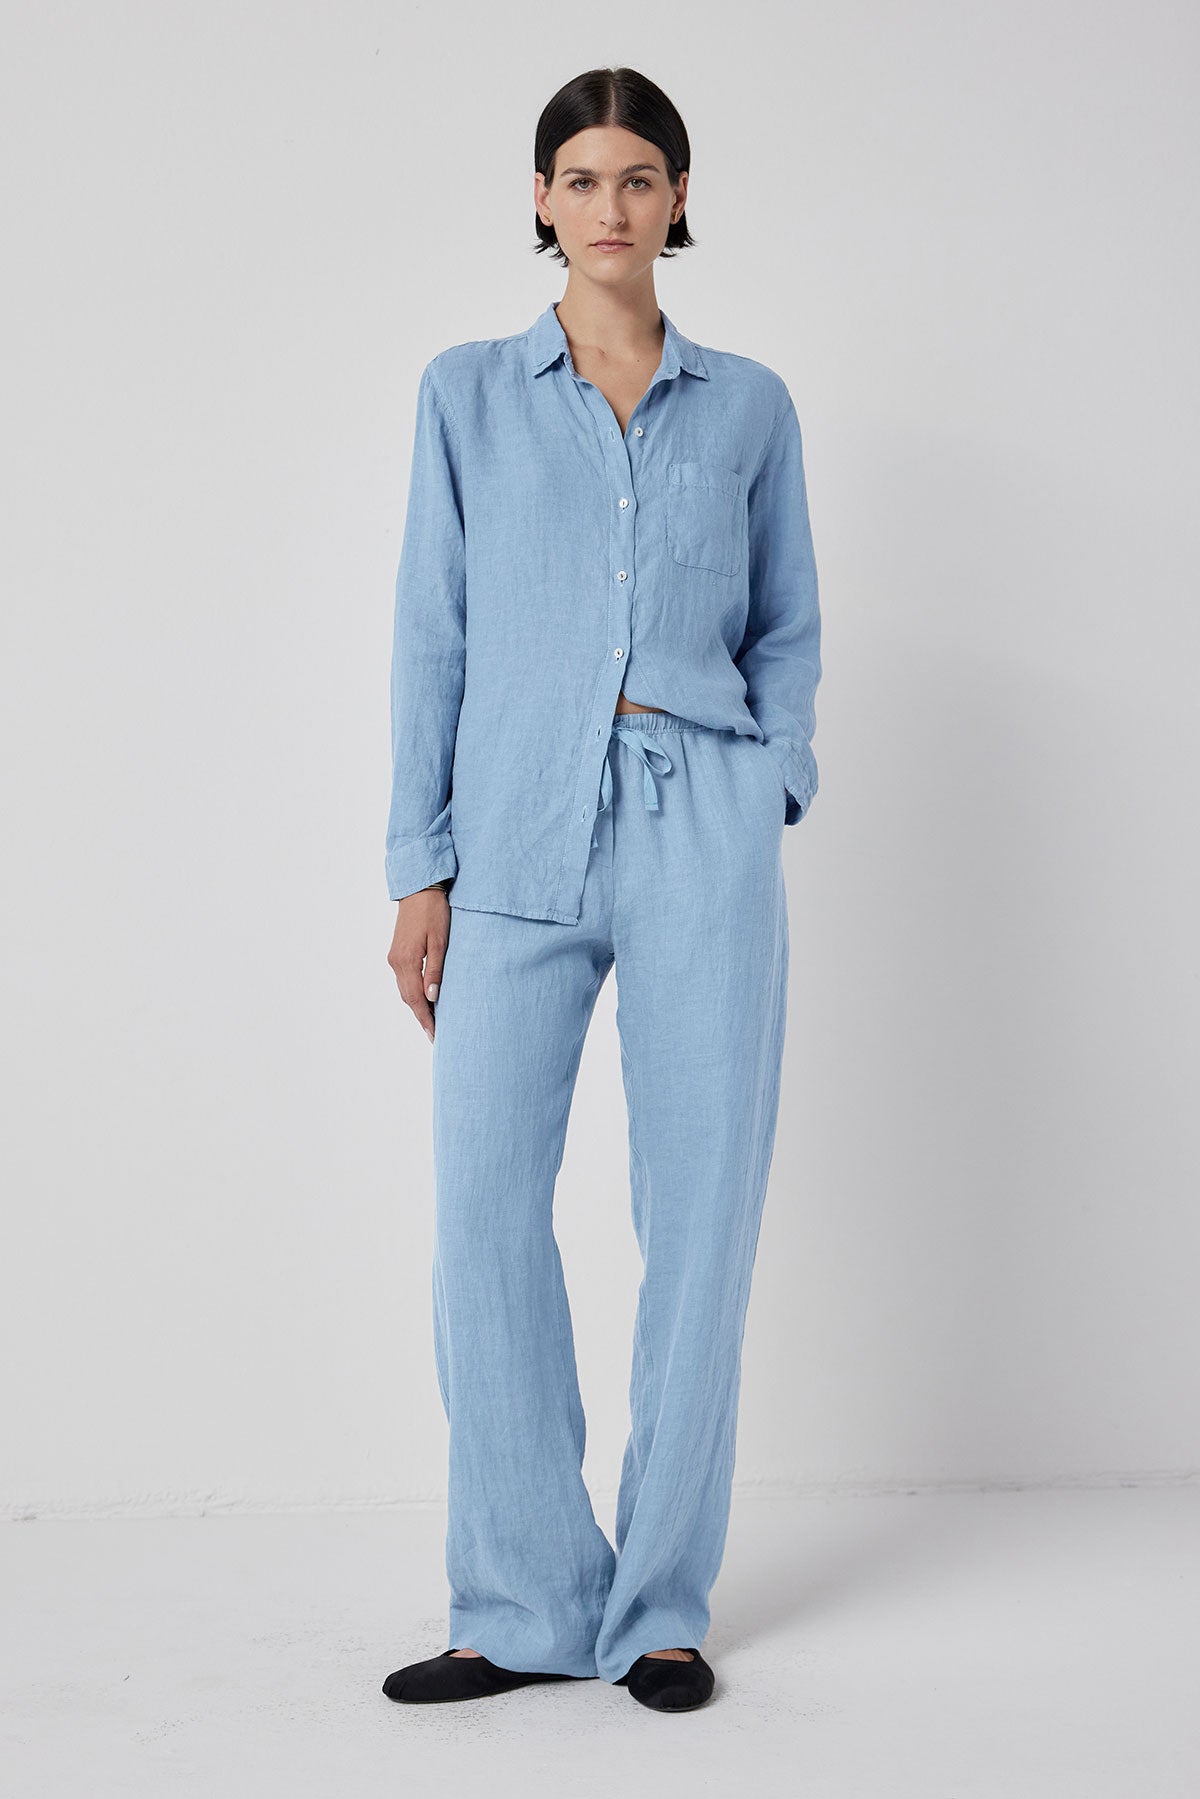 A woman standing in a studio wearing a light blue button-up shirt and matching PICO LINEN PANTS by Velvet by Jenny Graham, with her hands slightly tucked in relaxed fit linen pants.-36212497875137